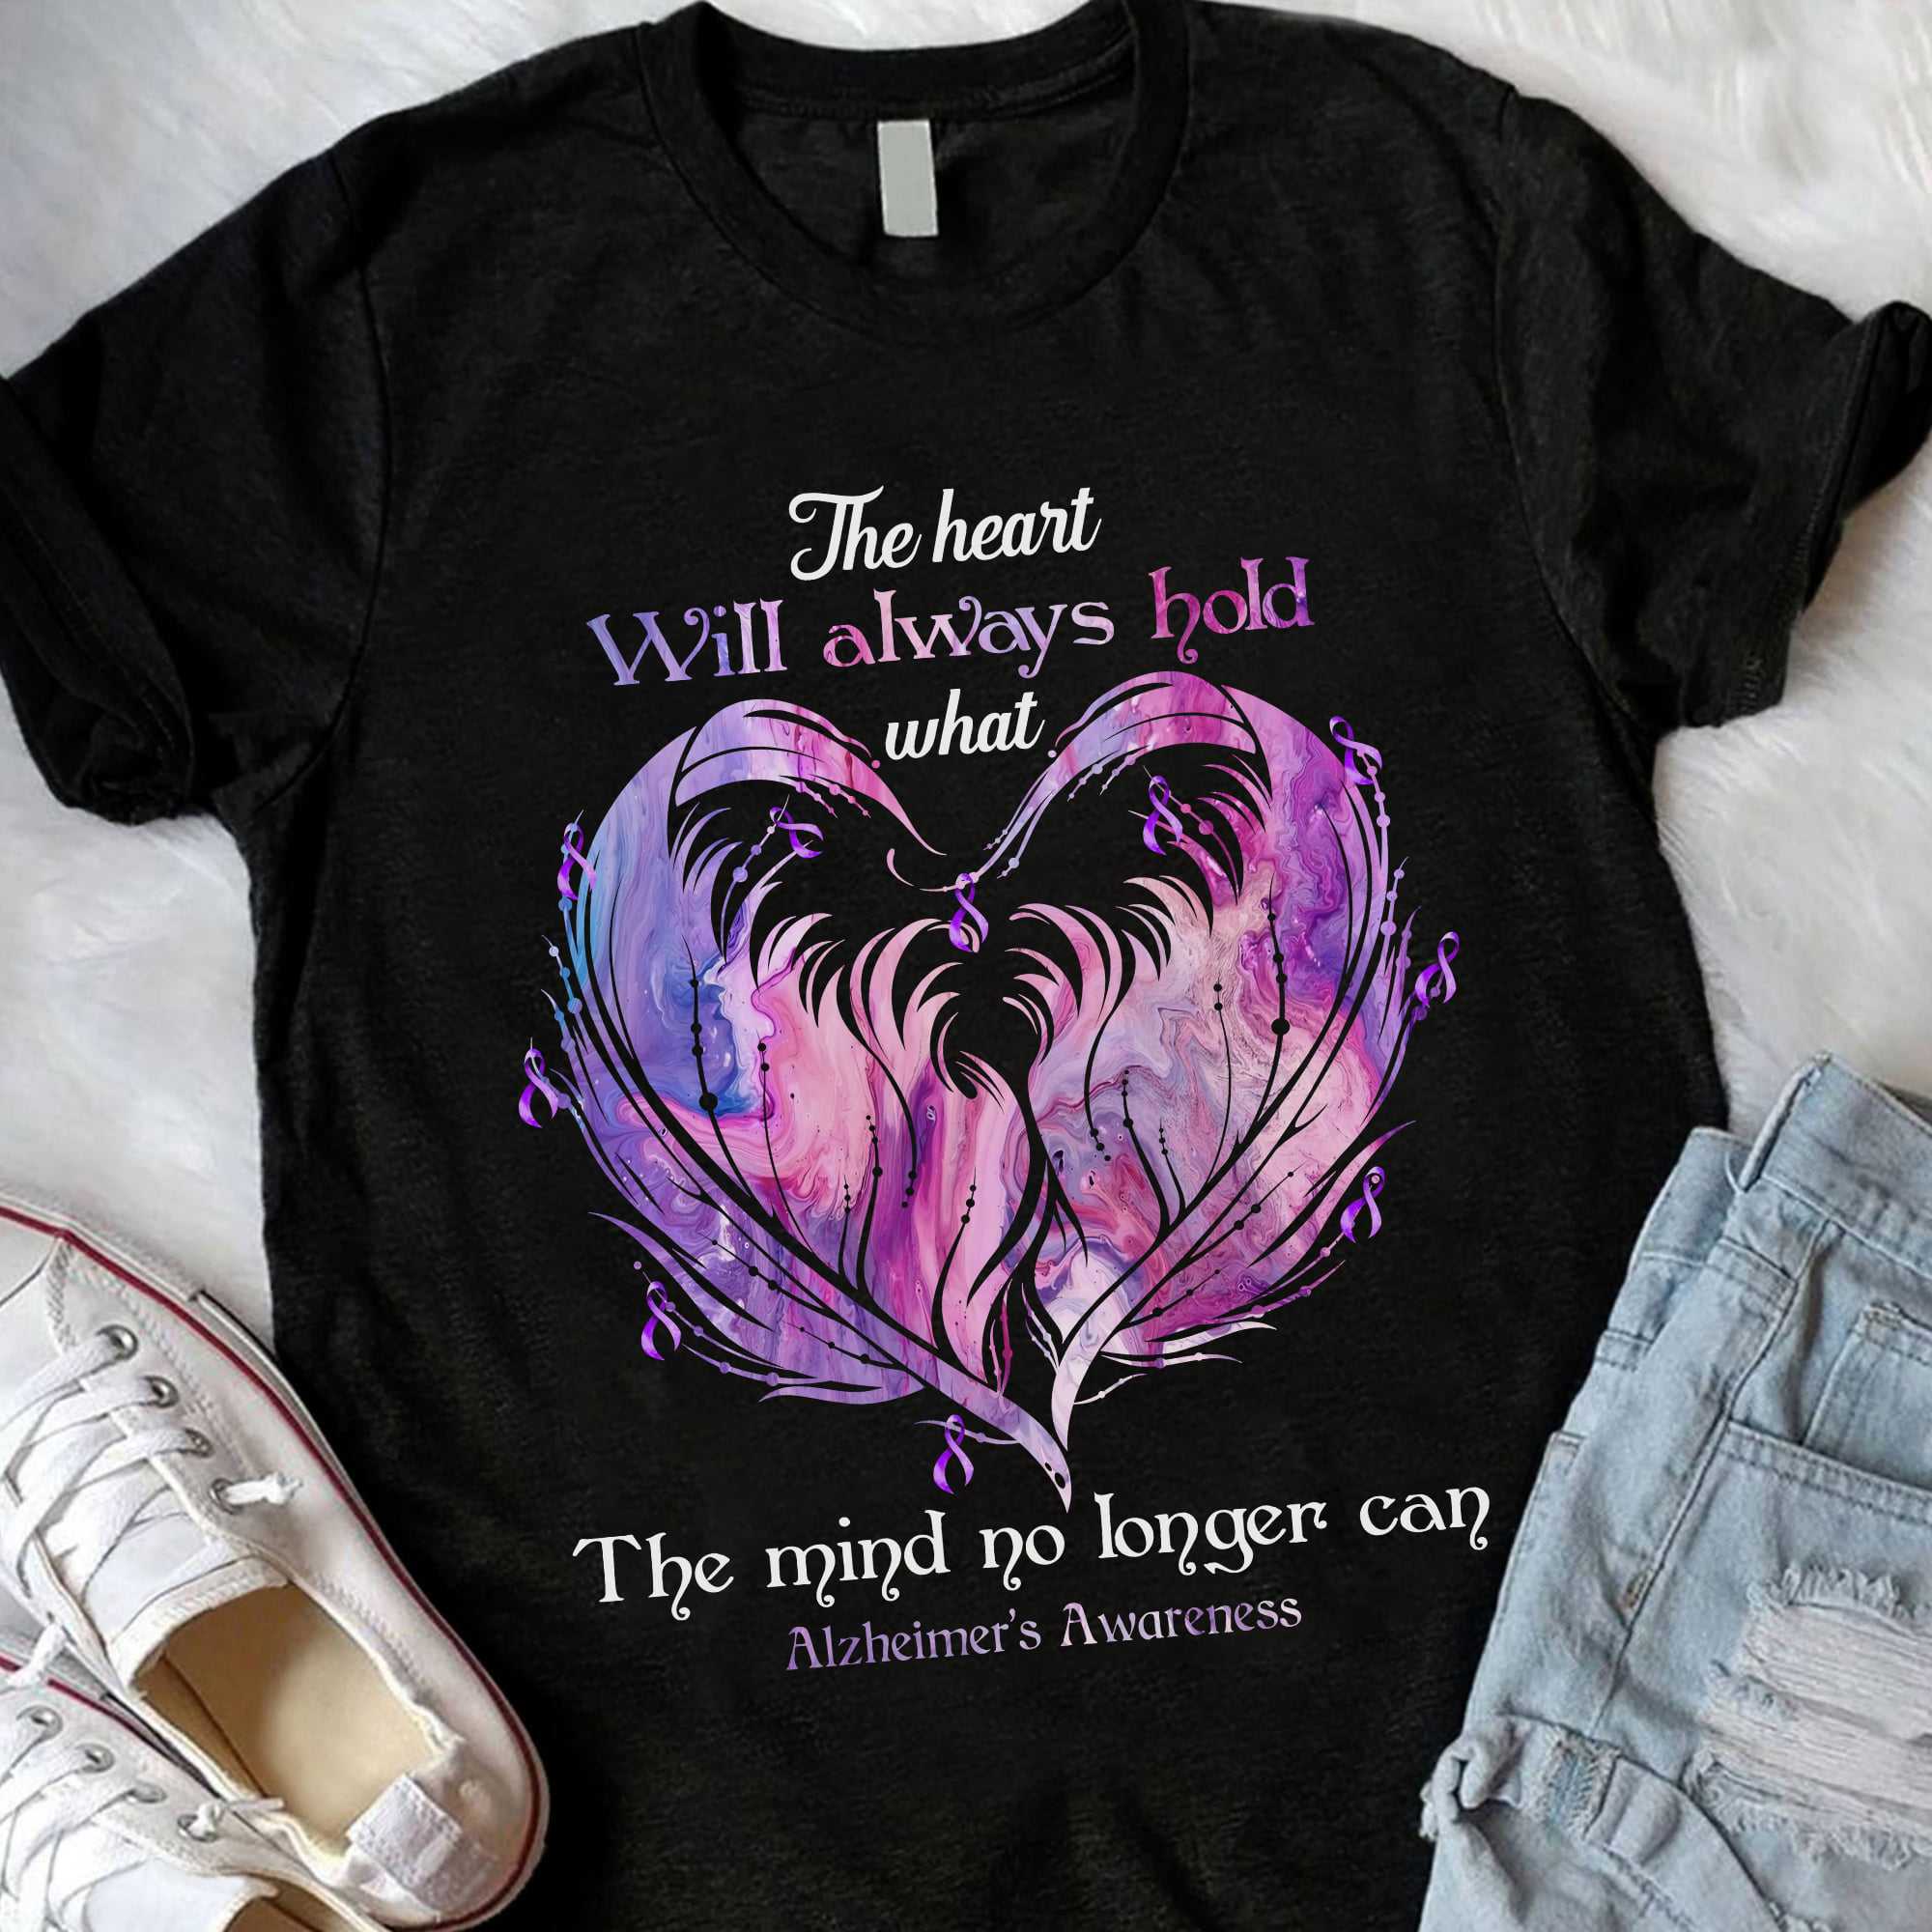 Alzhelmer's feathers heart - The heart will always hold what the mond no longer can